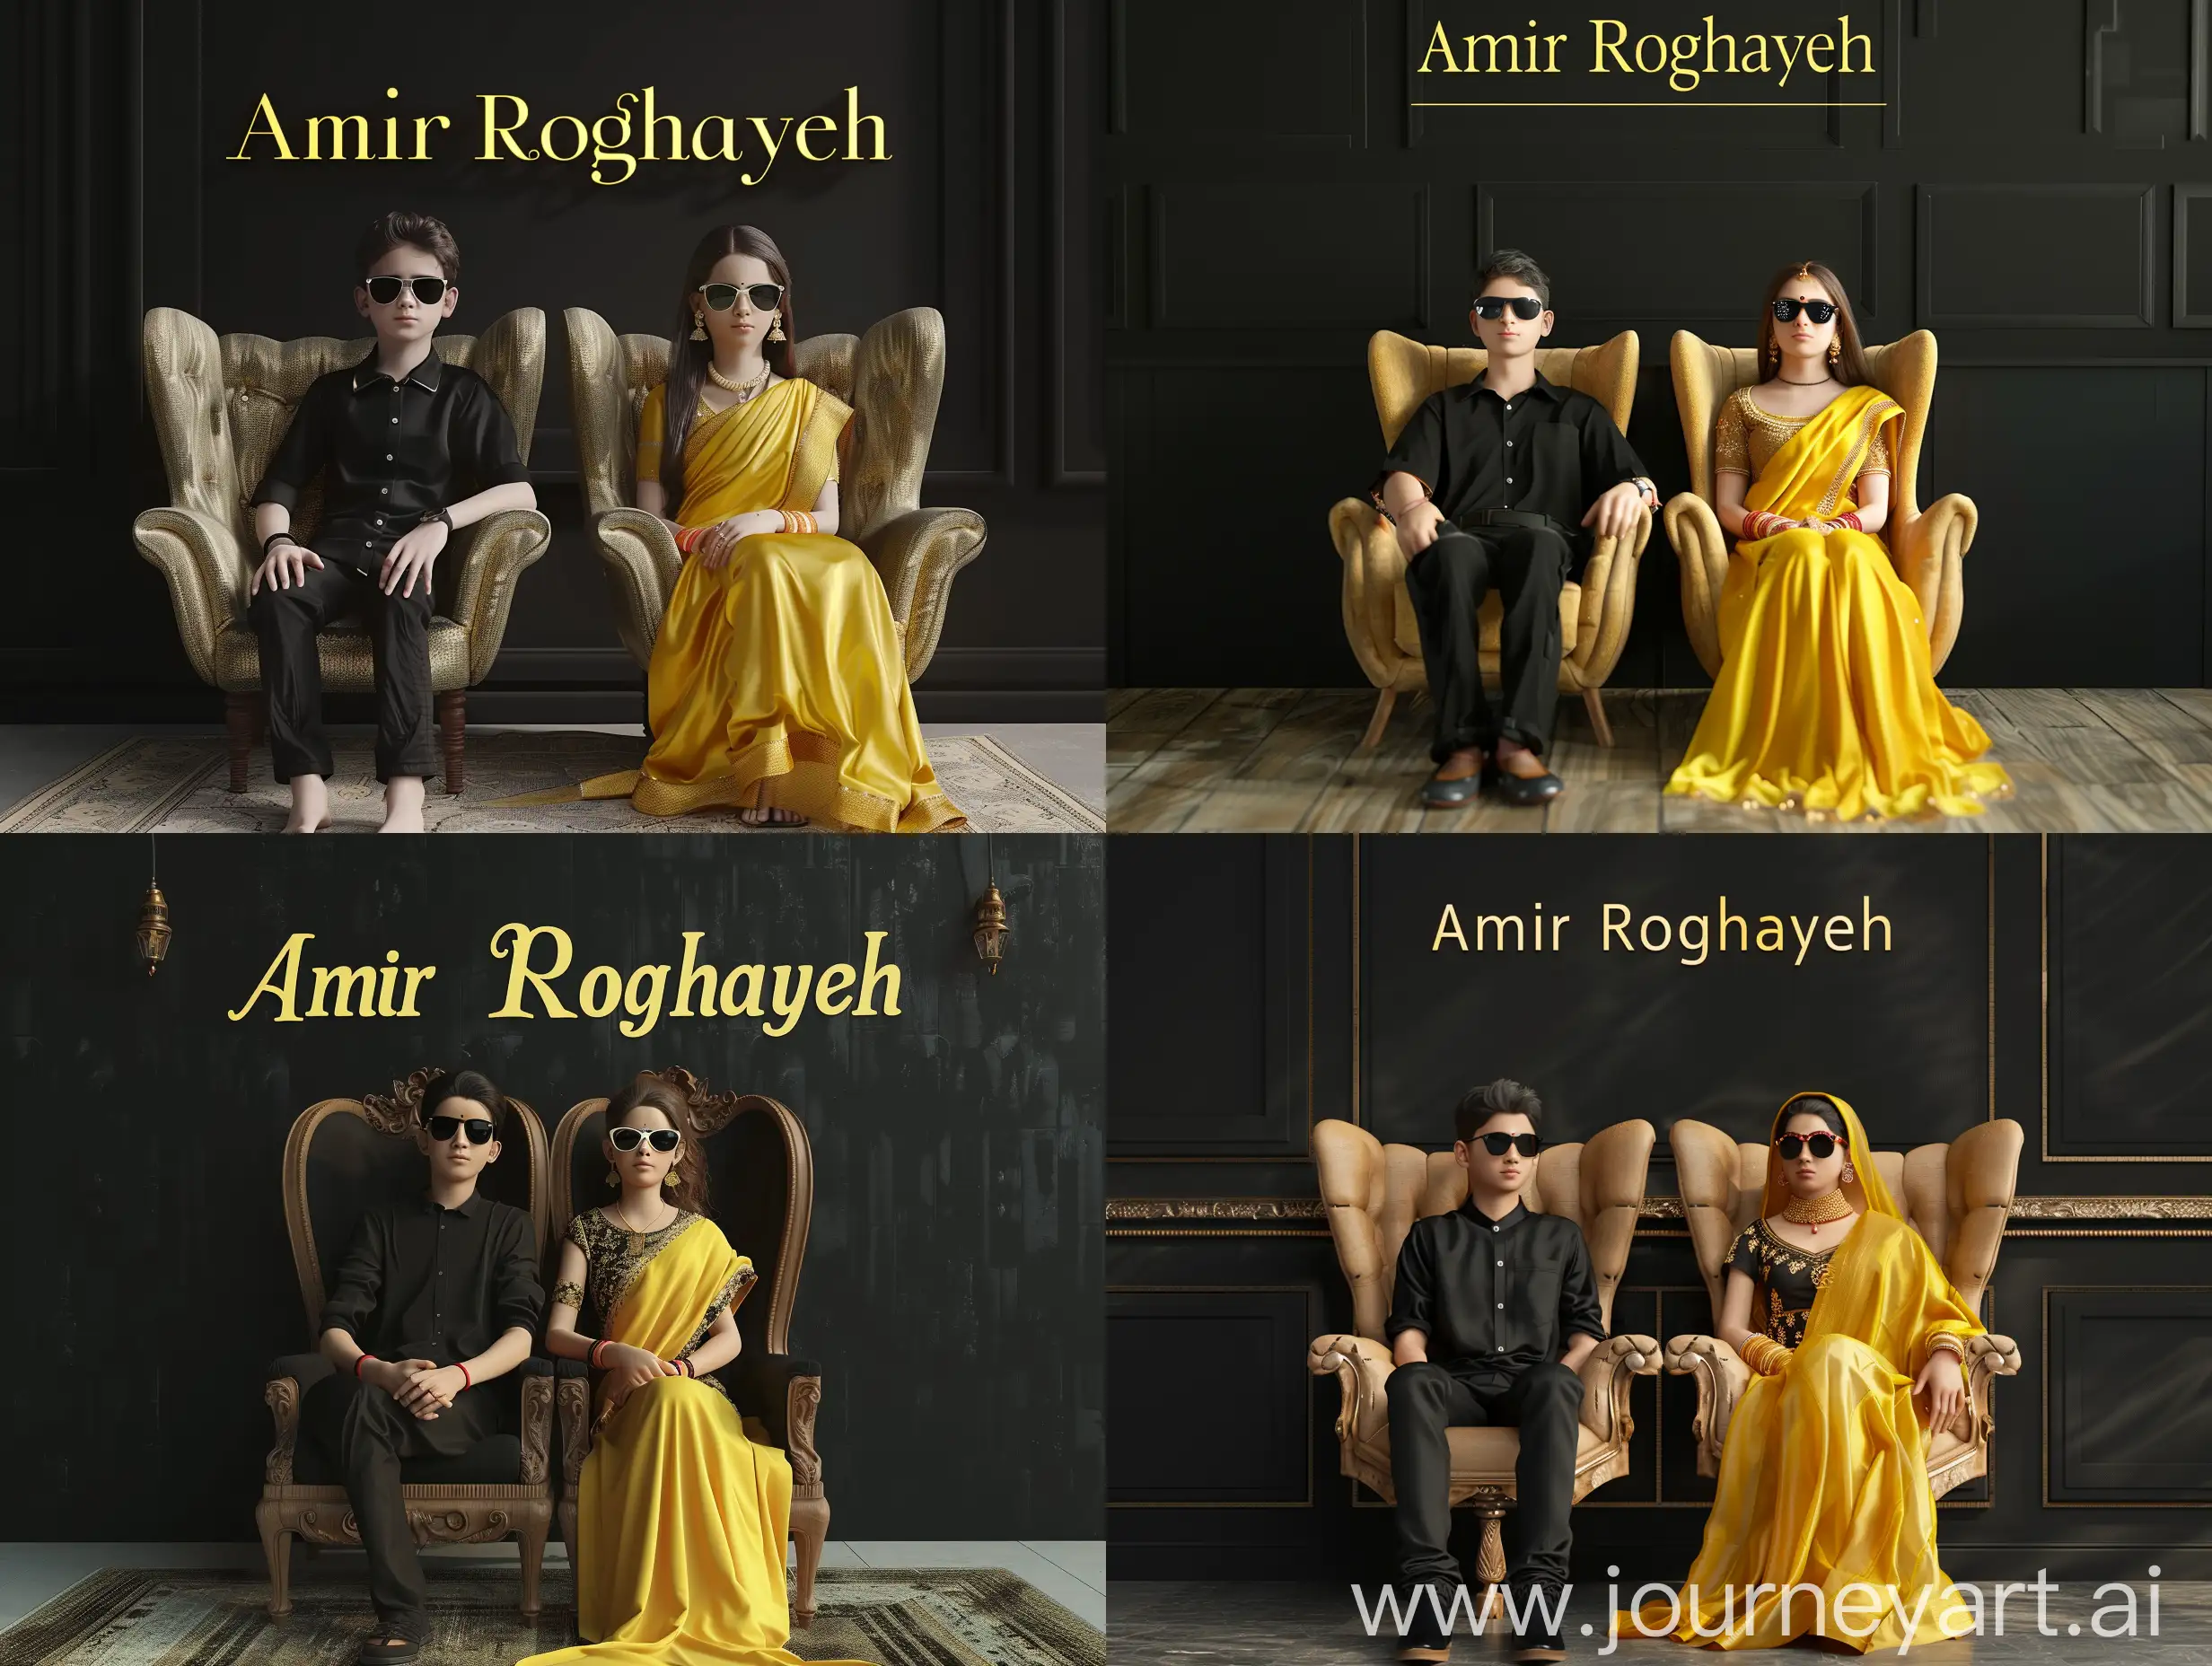 Create a 3D realistic image for a profile picture of a 28-year-old couple sitting comfortably in wings chair. The boy is wearing a black shirt pant and sunglasses. And the girl is wearing a yellow saree and sunglasses. they are looking ahead. “Amir” and “Roghayeh” are written in large font just above of them on the black wall in the background.